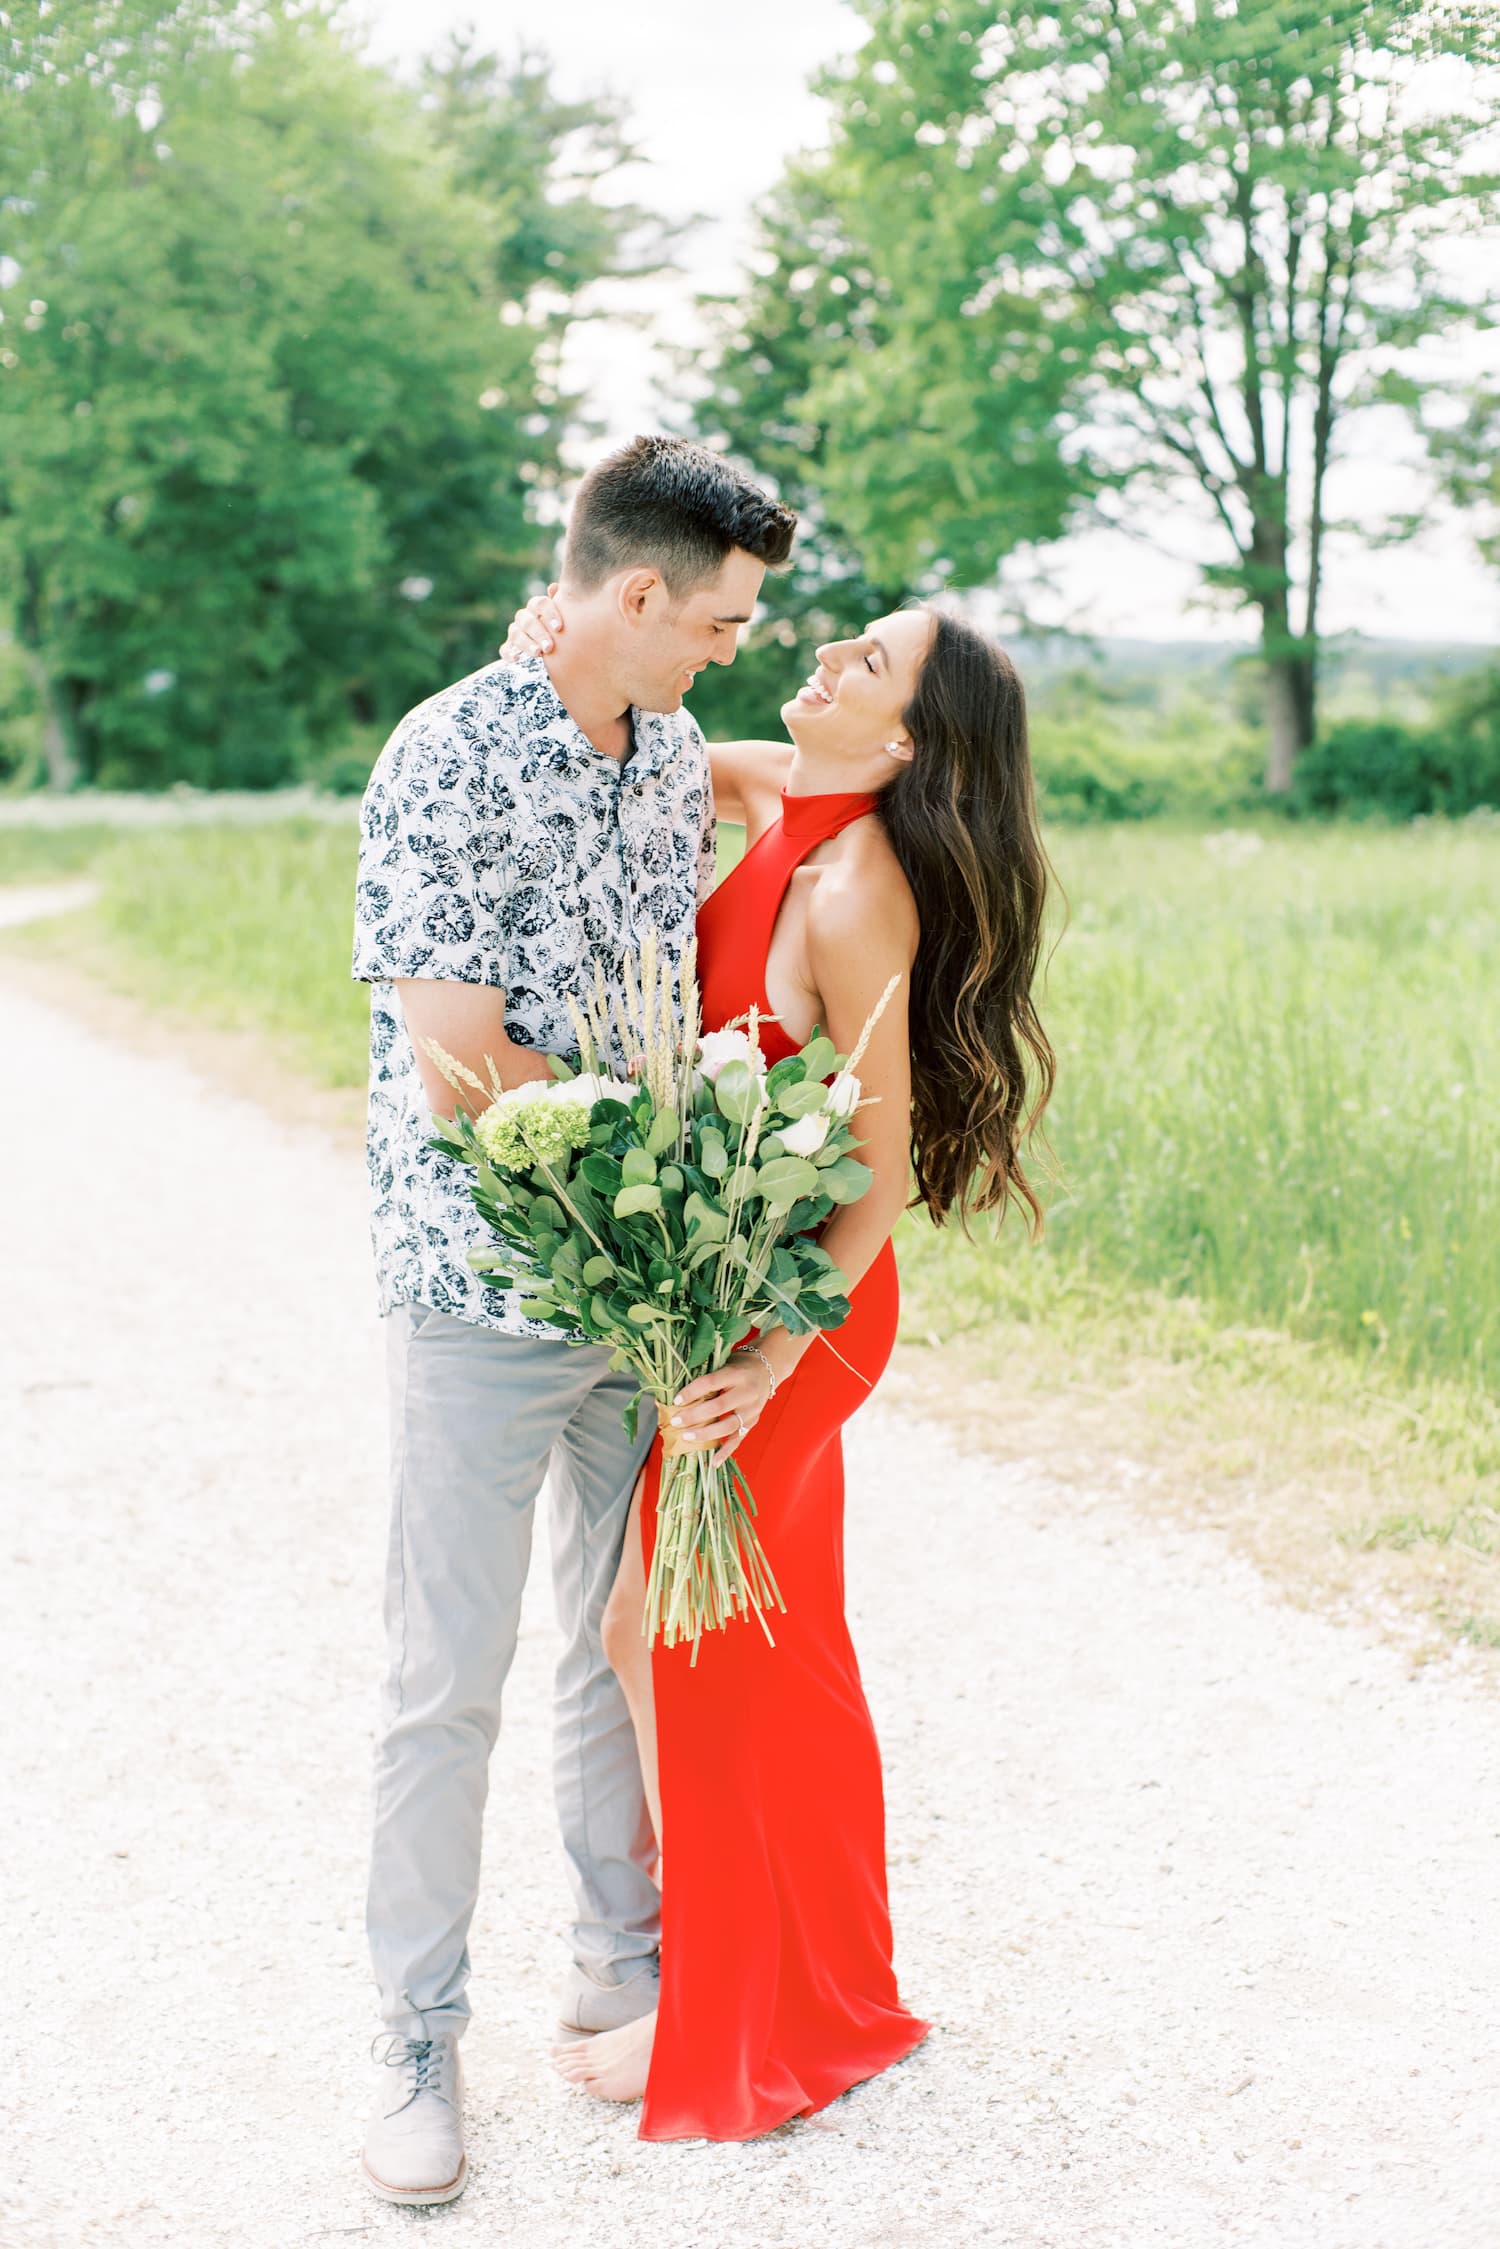 Bride to be embraces groom to be during their engagement shoot as an example of a fine art engagement photo idea by Boston wedding and engagement photography Marcela Plosker.